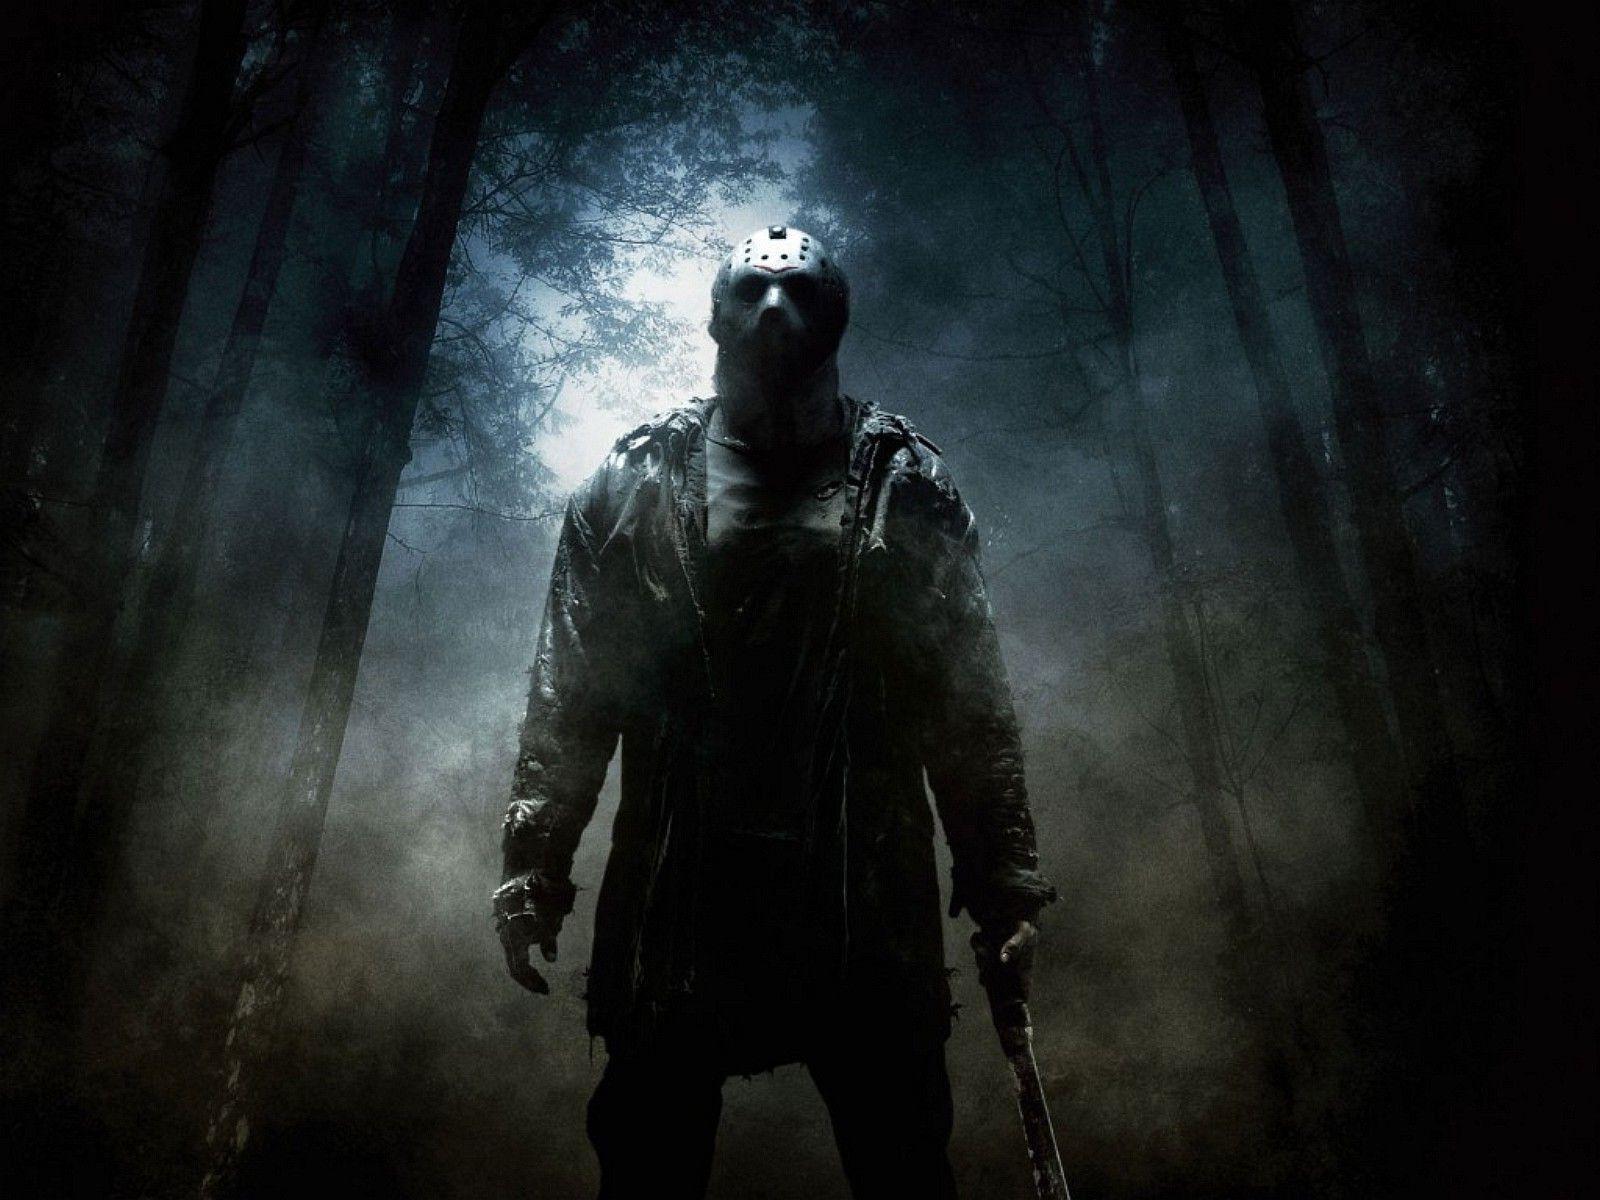 Wallpaper, movies, Jason Voorhees, midnight, Friday the 13th